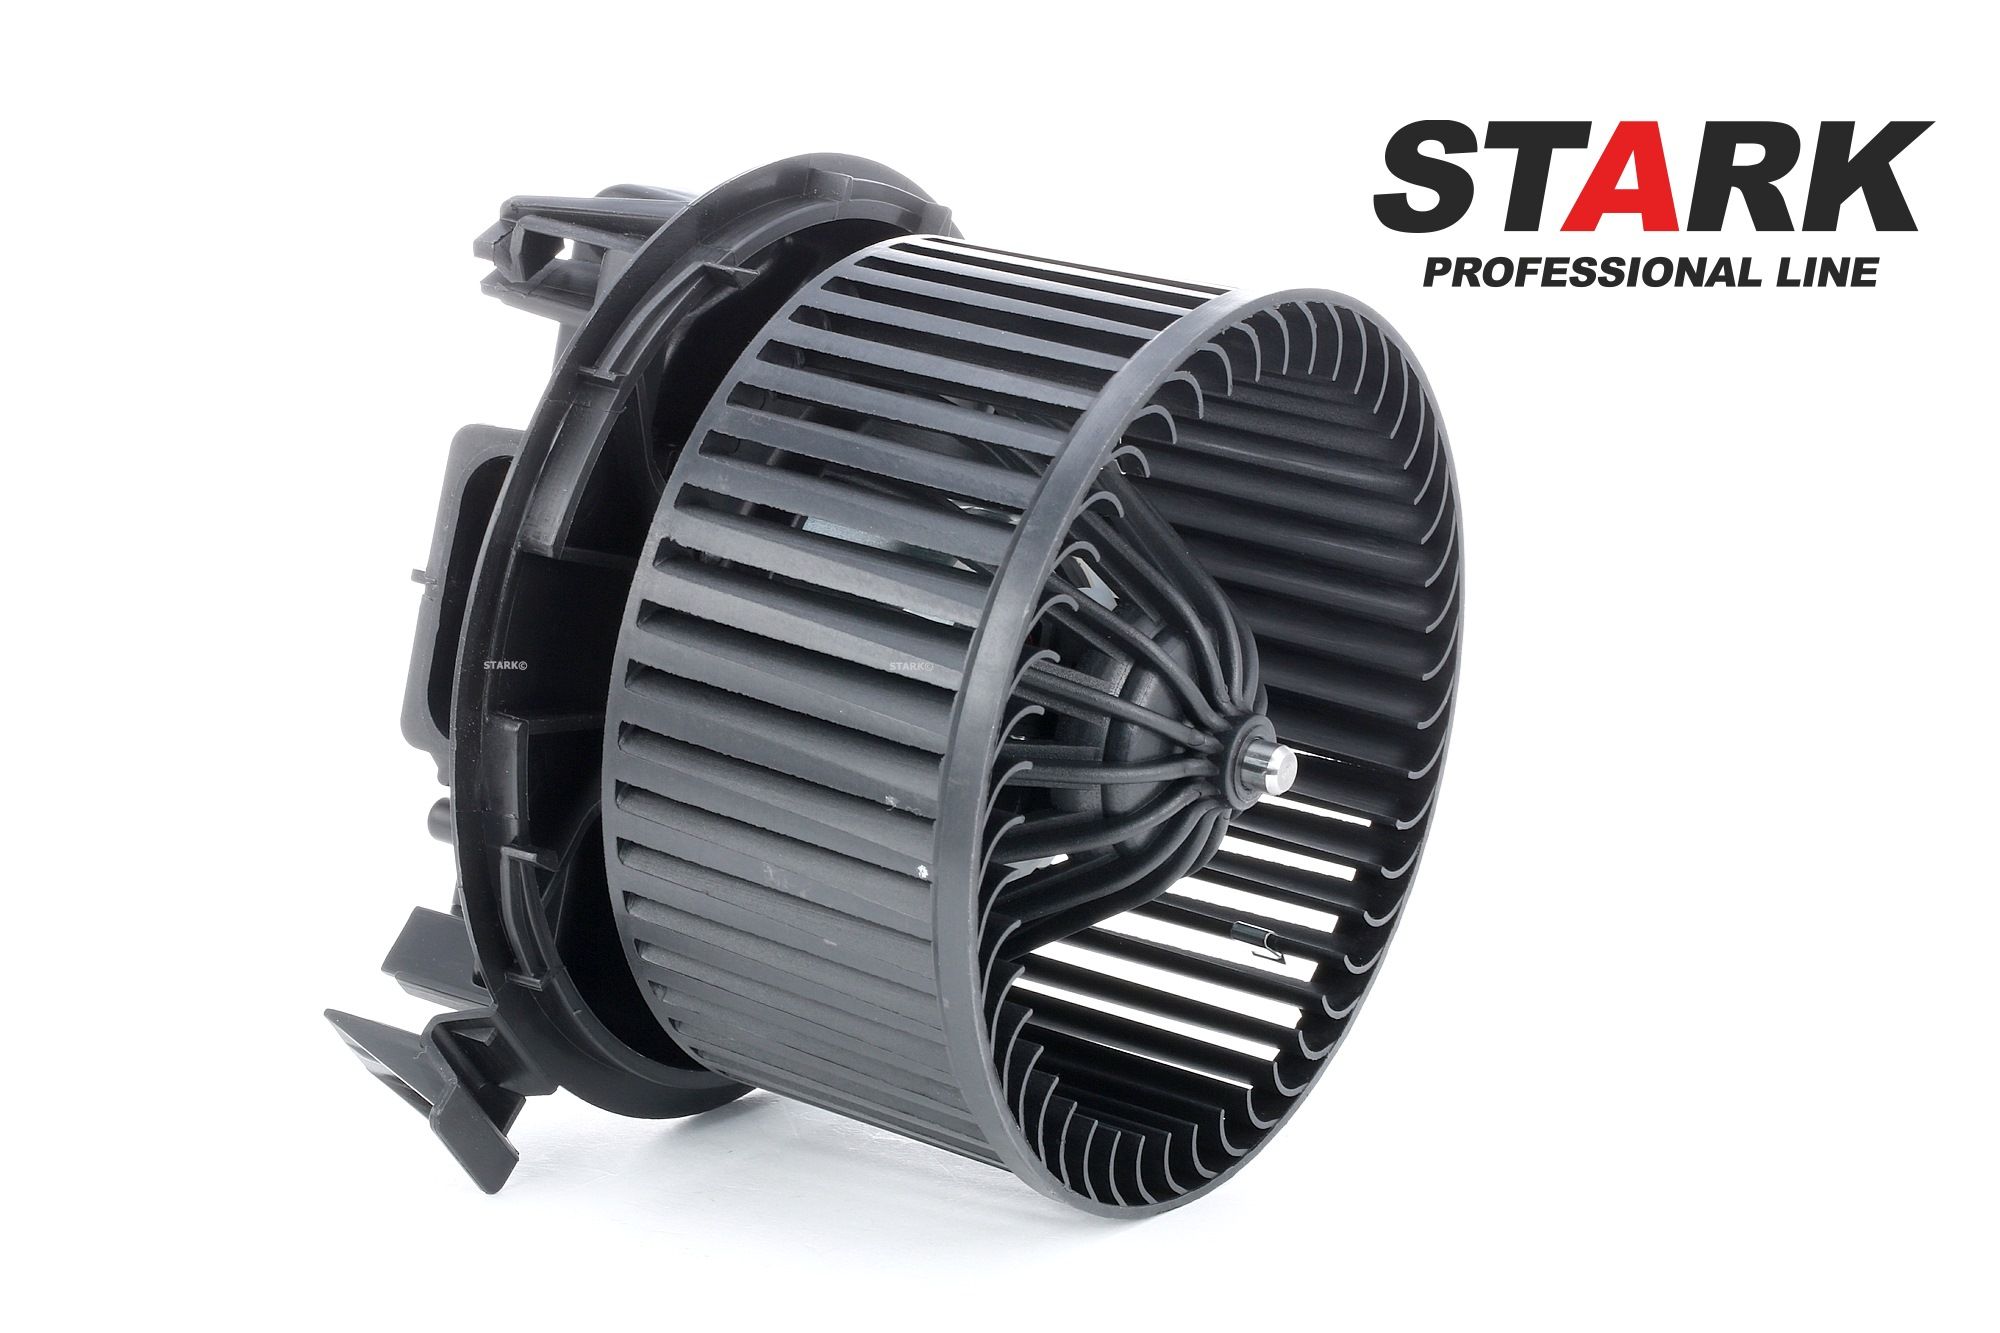 STARK for left-hand/right-hand drive vehicles Rated Power: 204W Blower motor SKIB-0310045 buy